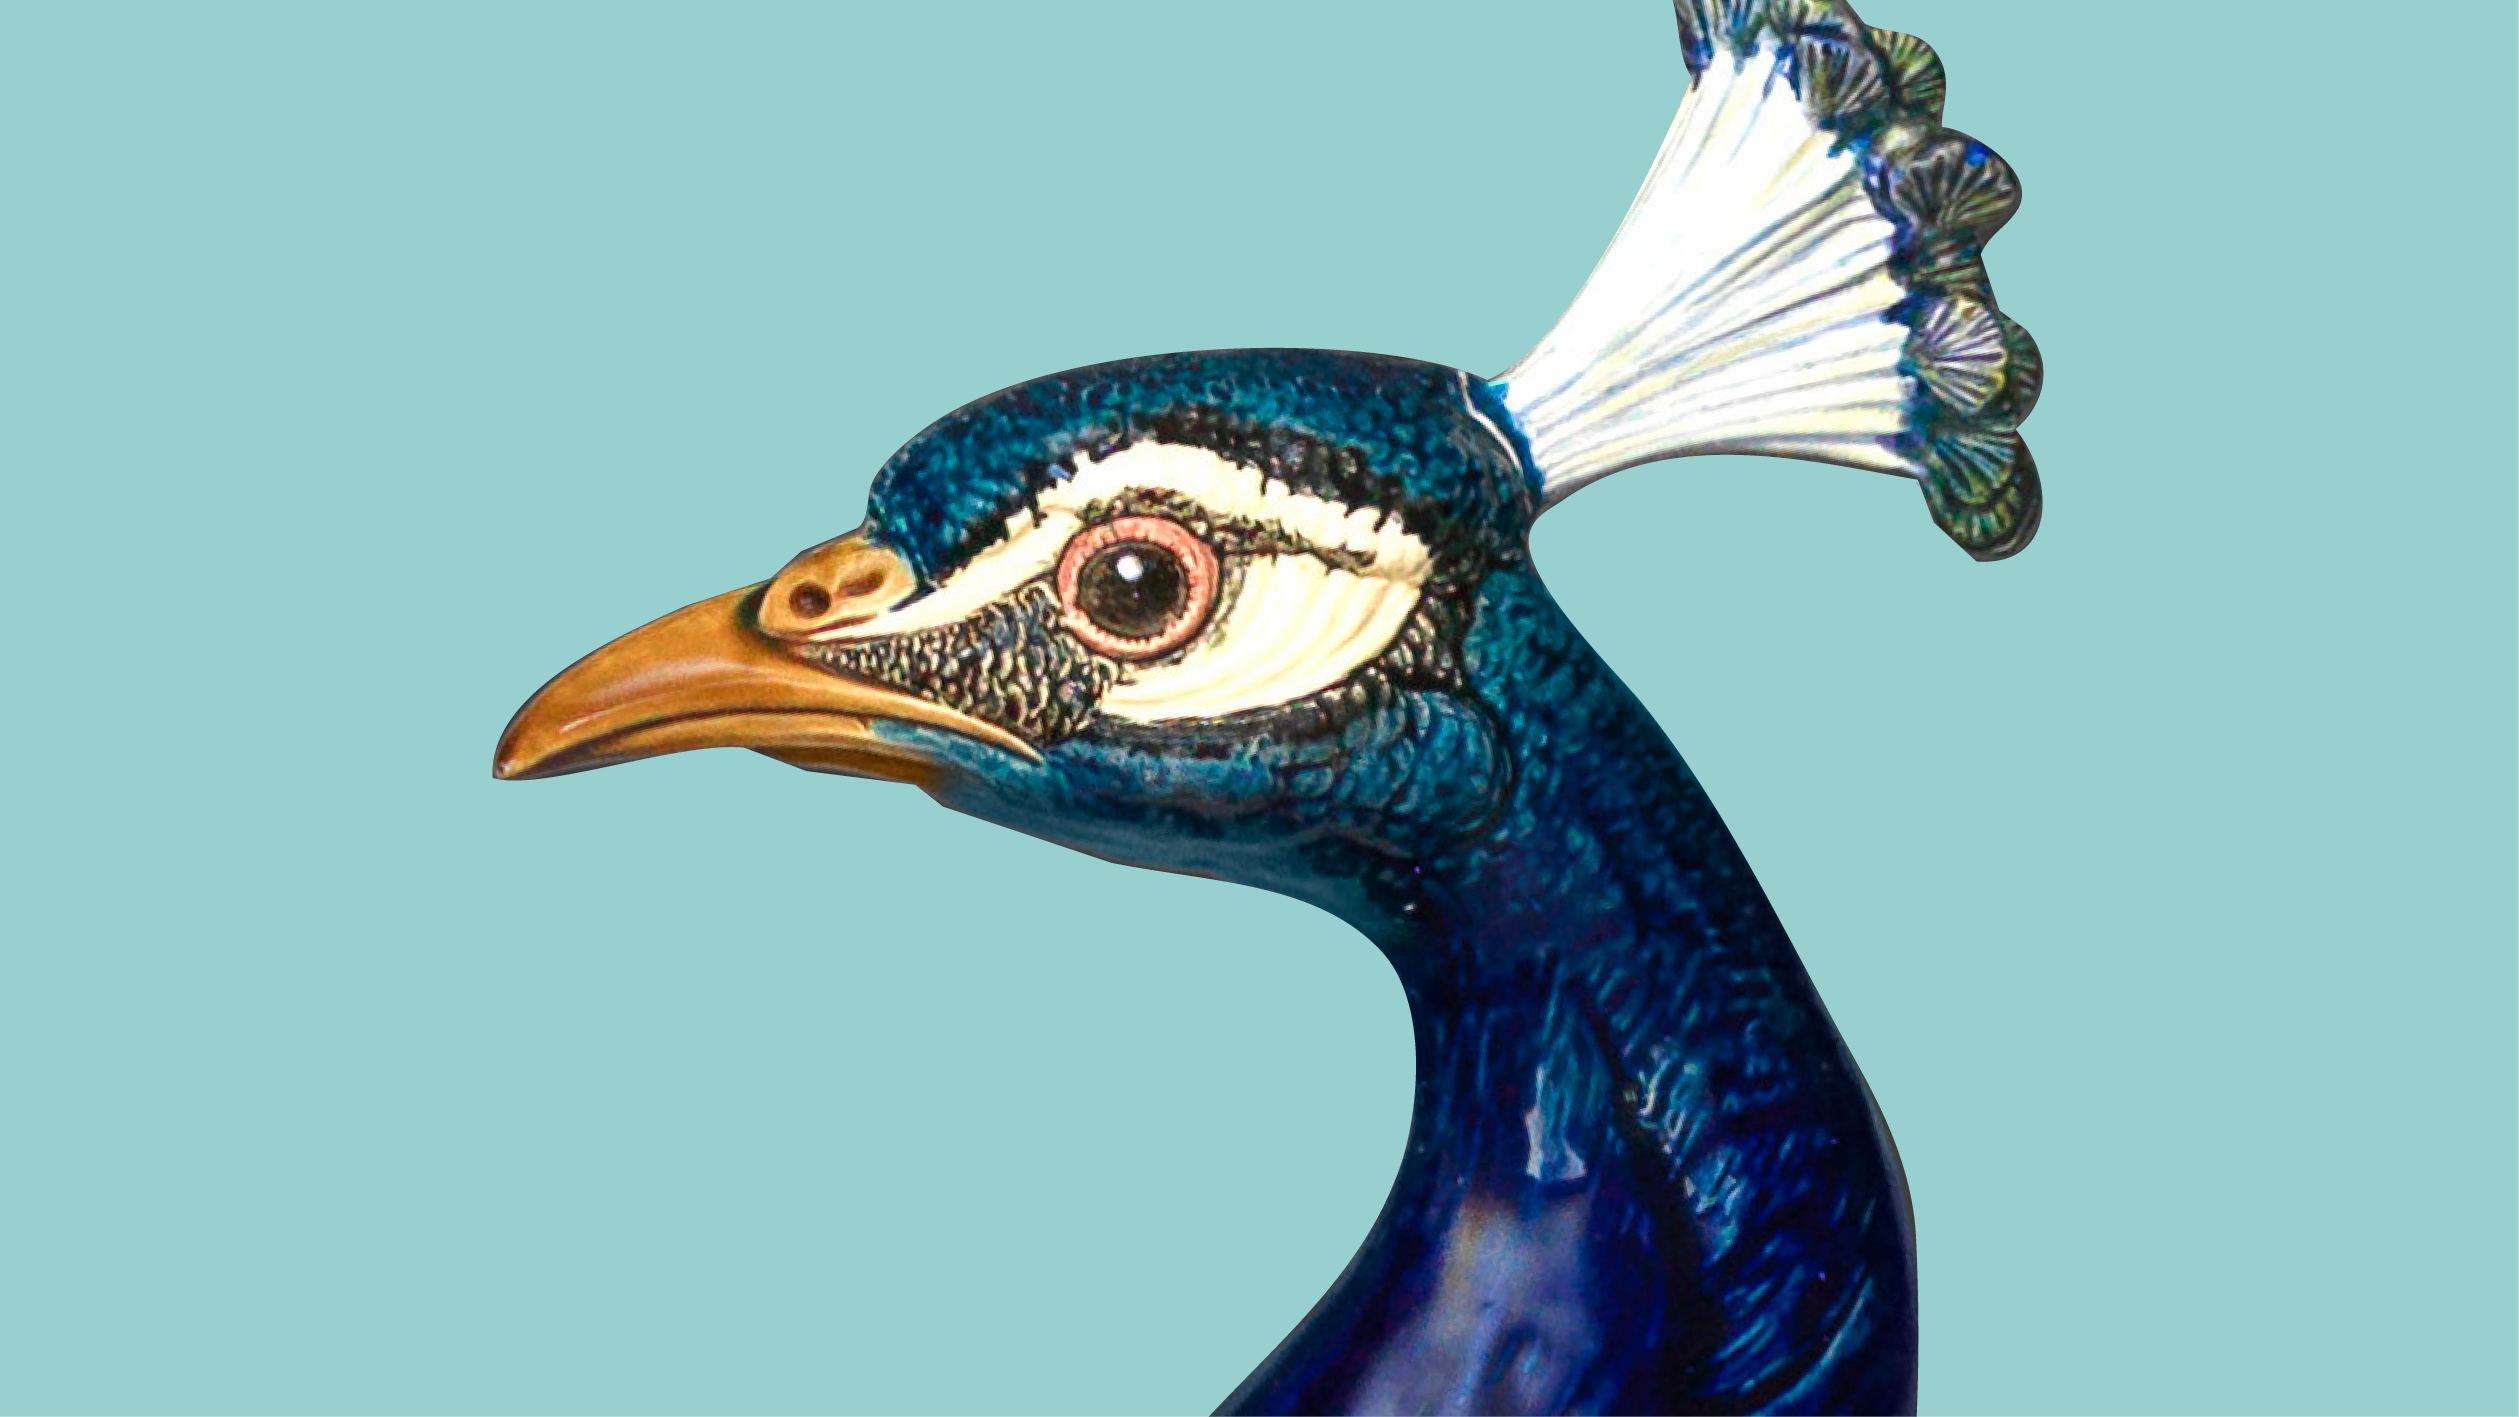 detail photo of ceramic peacock head against teal background